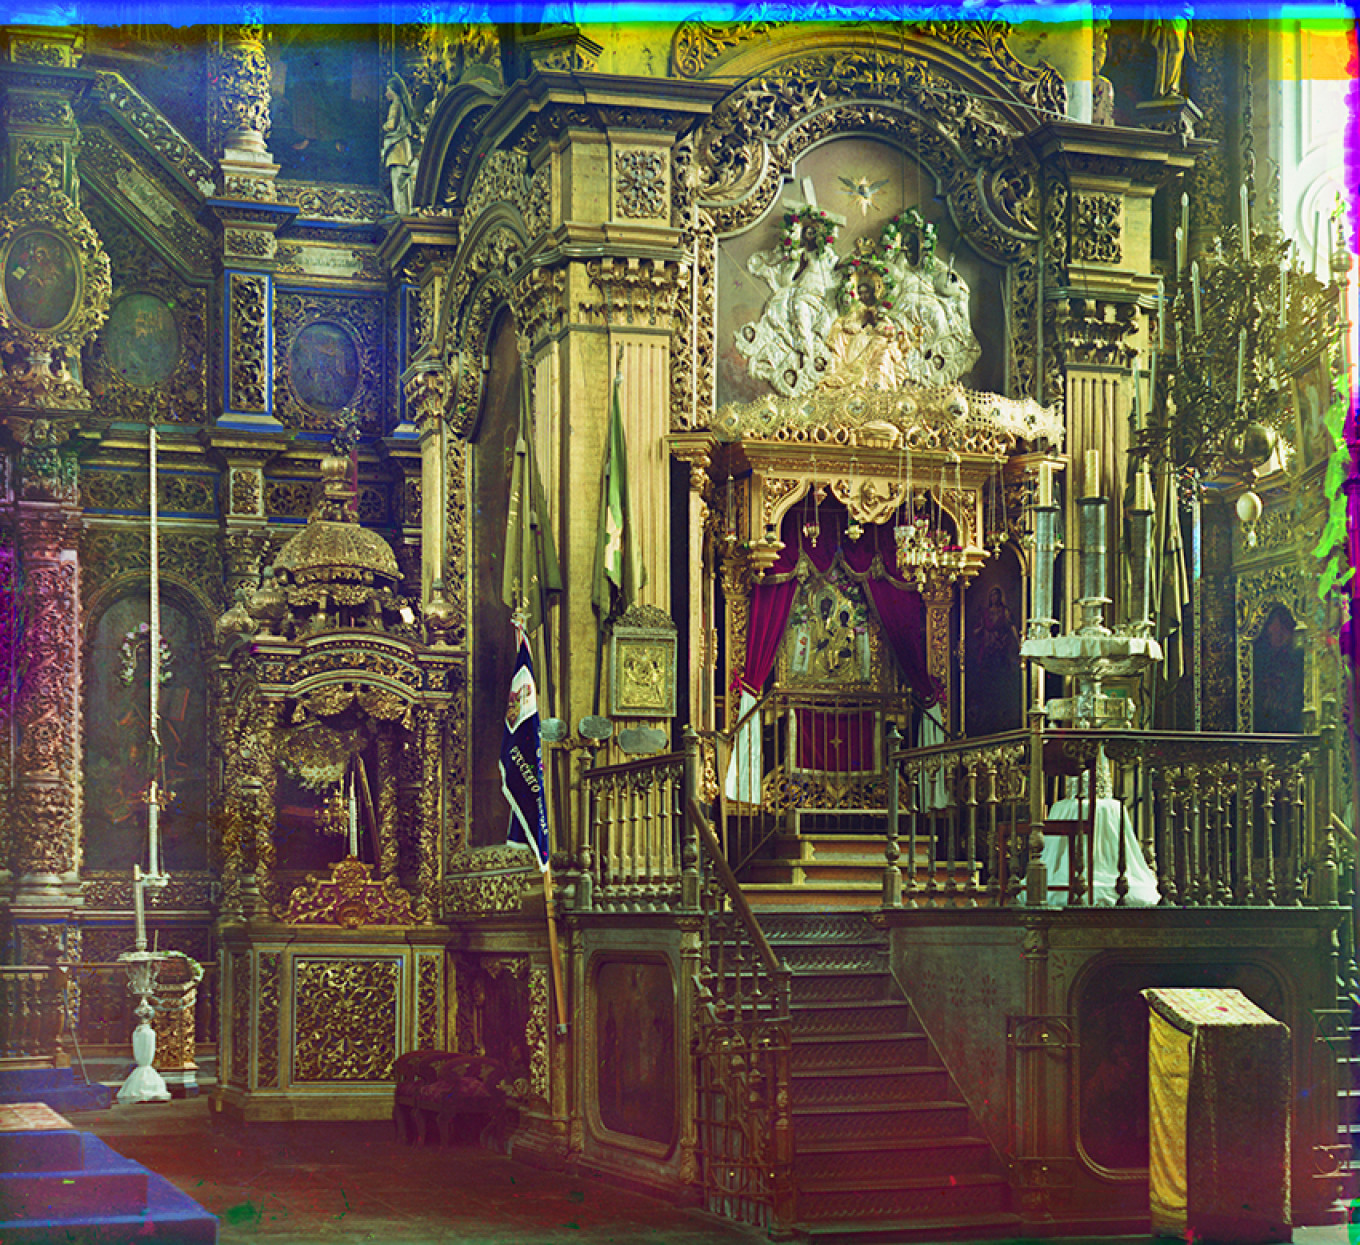  Cathedral of Dormition of the Virgin, Smolensk, Summer 1912, with the Icon of the Virgin, said to be painted by Apostle Luke, in the baldachin. S Prokudin-Gorsky 20413 